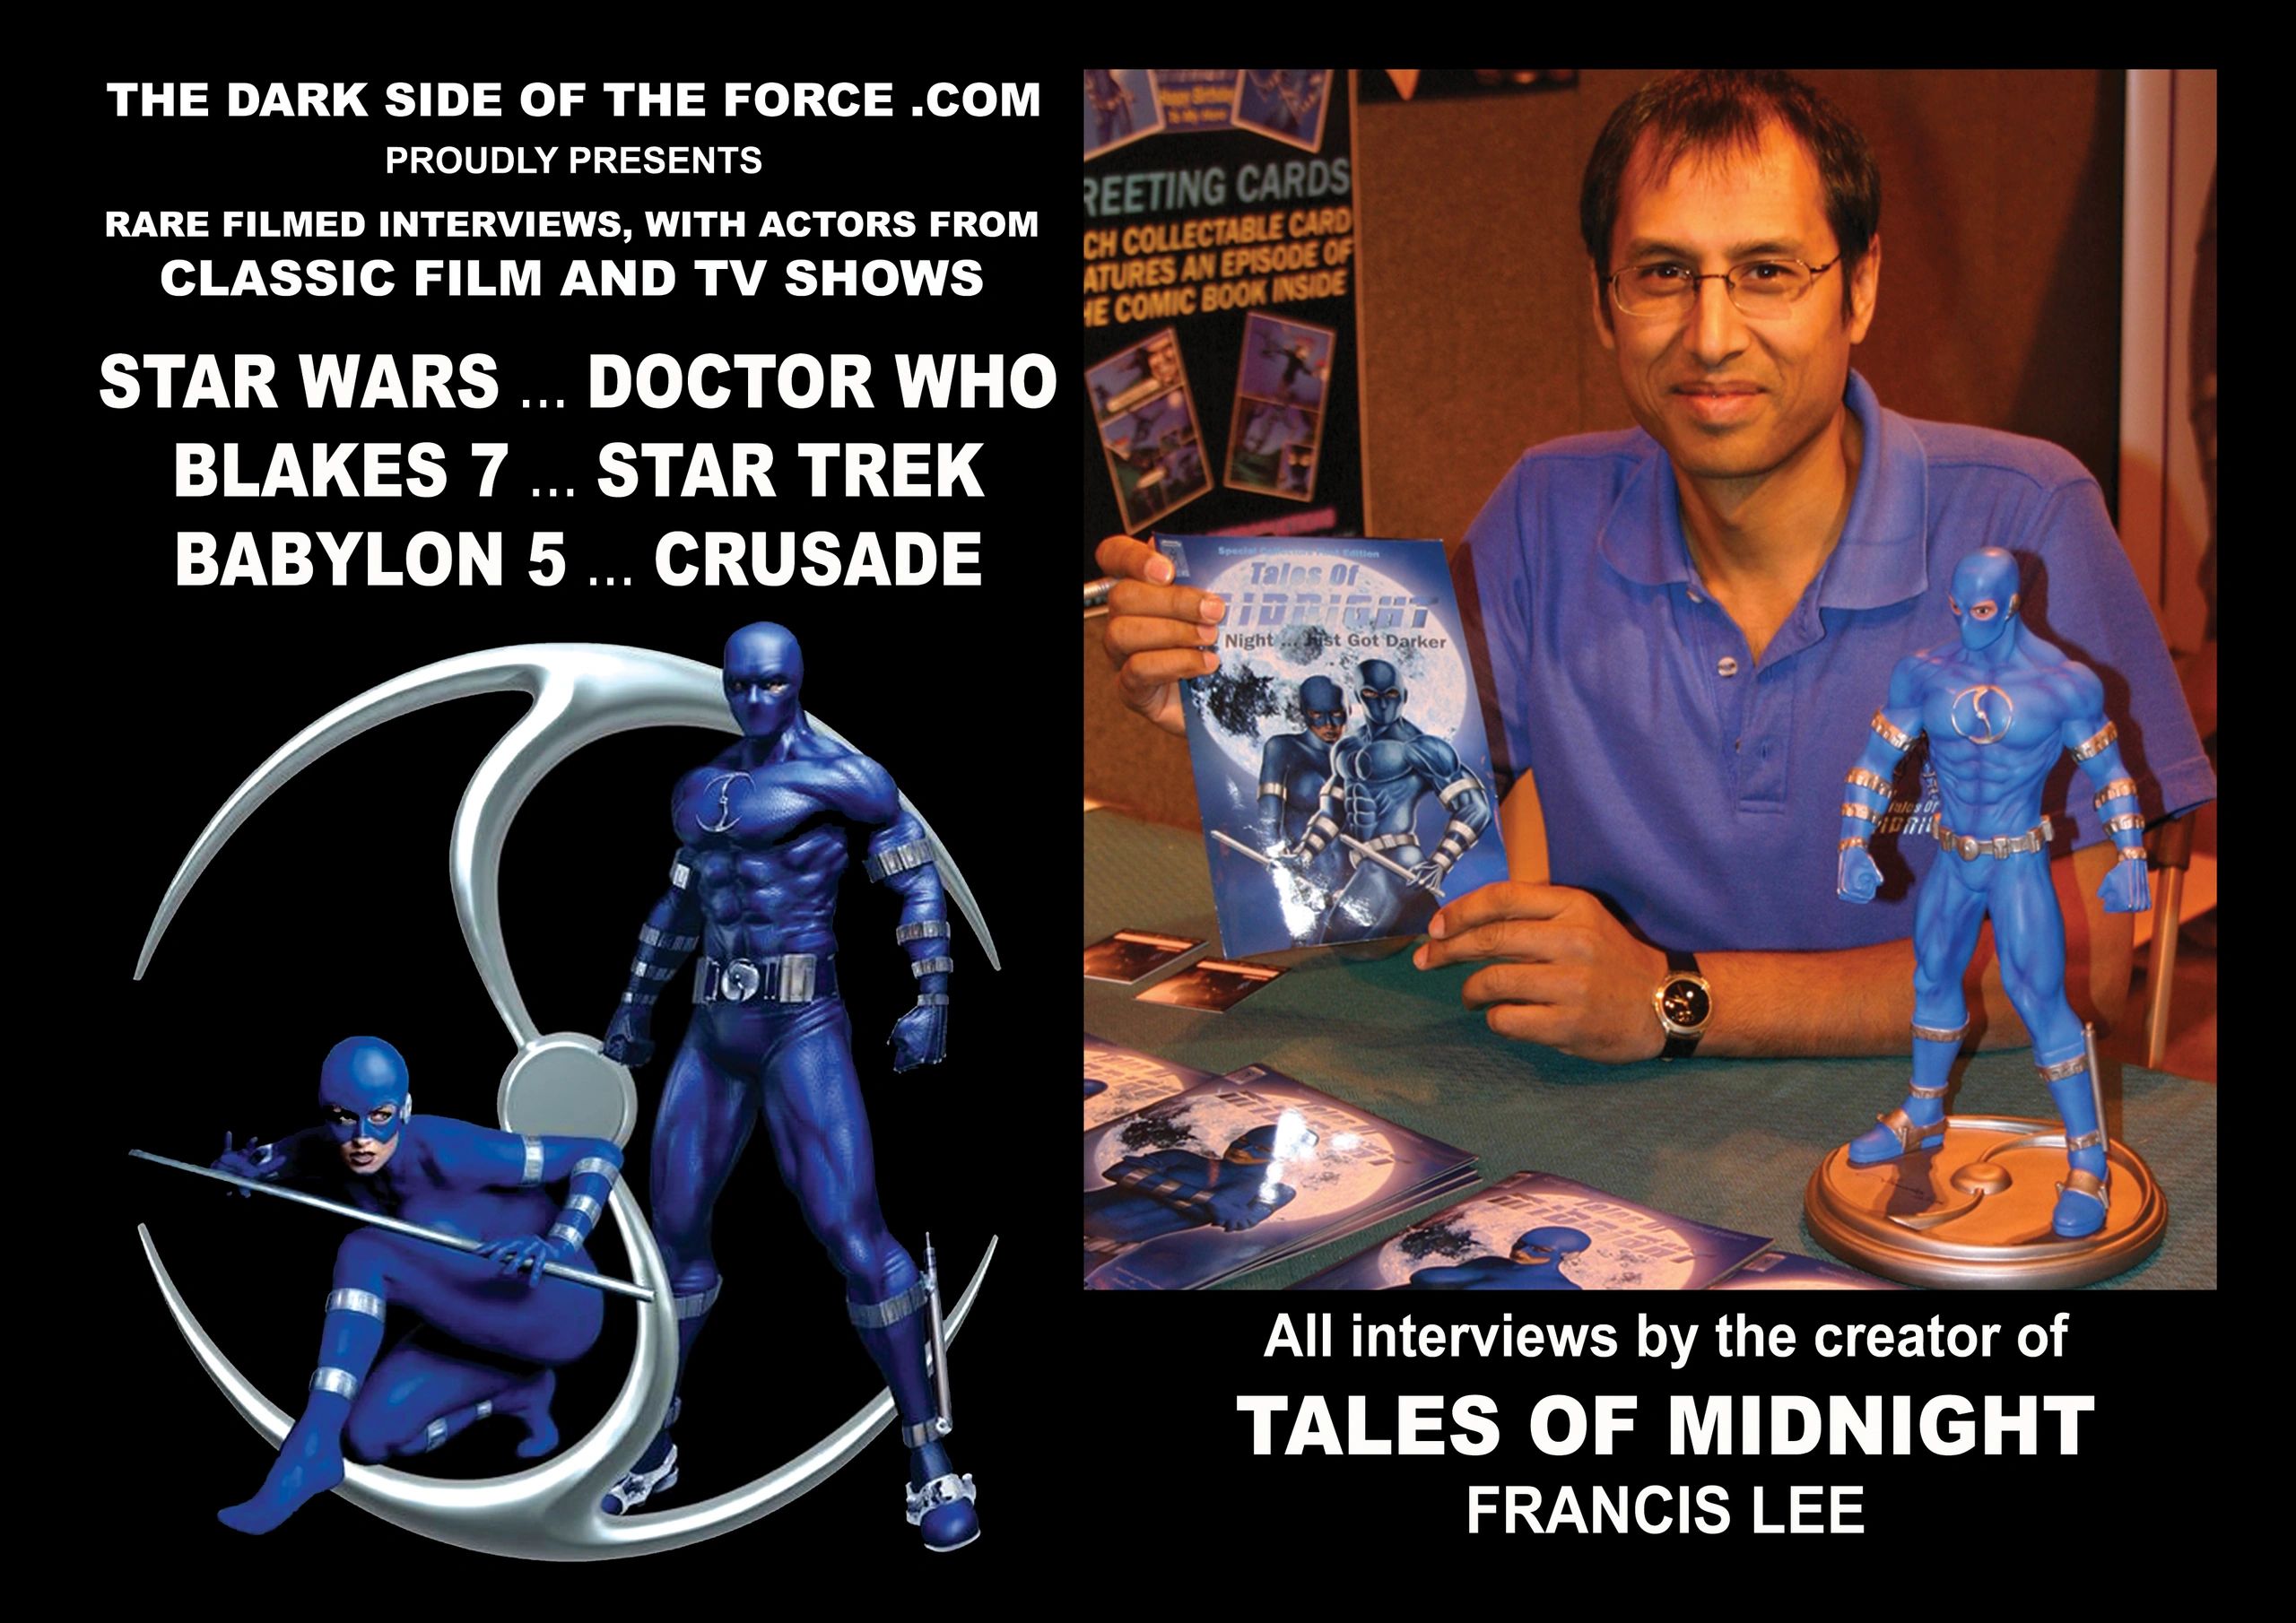 THE DARK SIDE OF THE FORCE .COM STAR WARS interviews with TALES OF MIDNIGHT creator Francis Lee